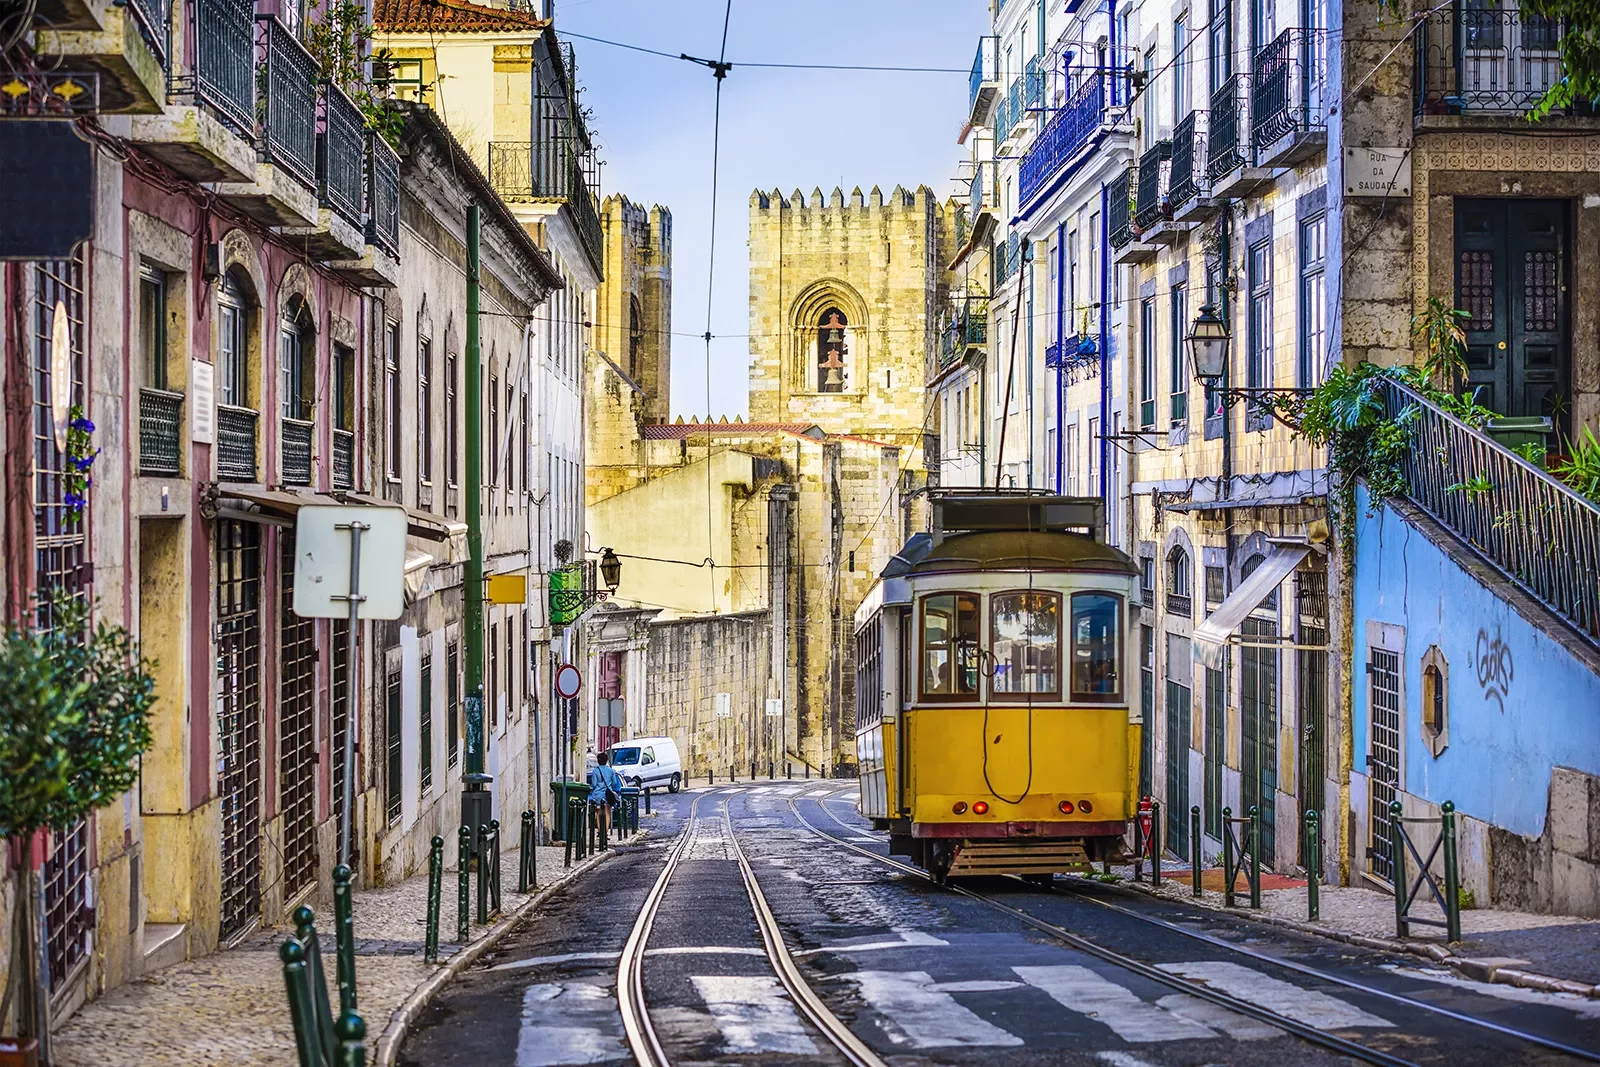 Street shot of Lisbon, Portugal. Tram, colorful buildings, stone tower in distance.